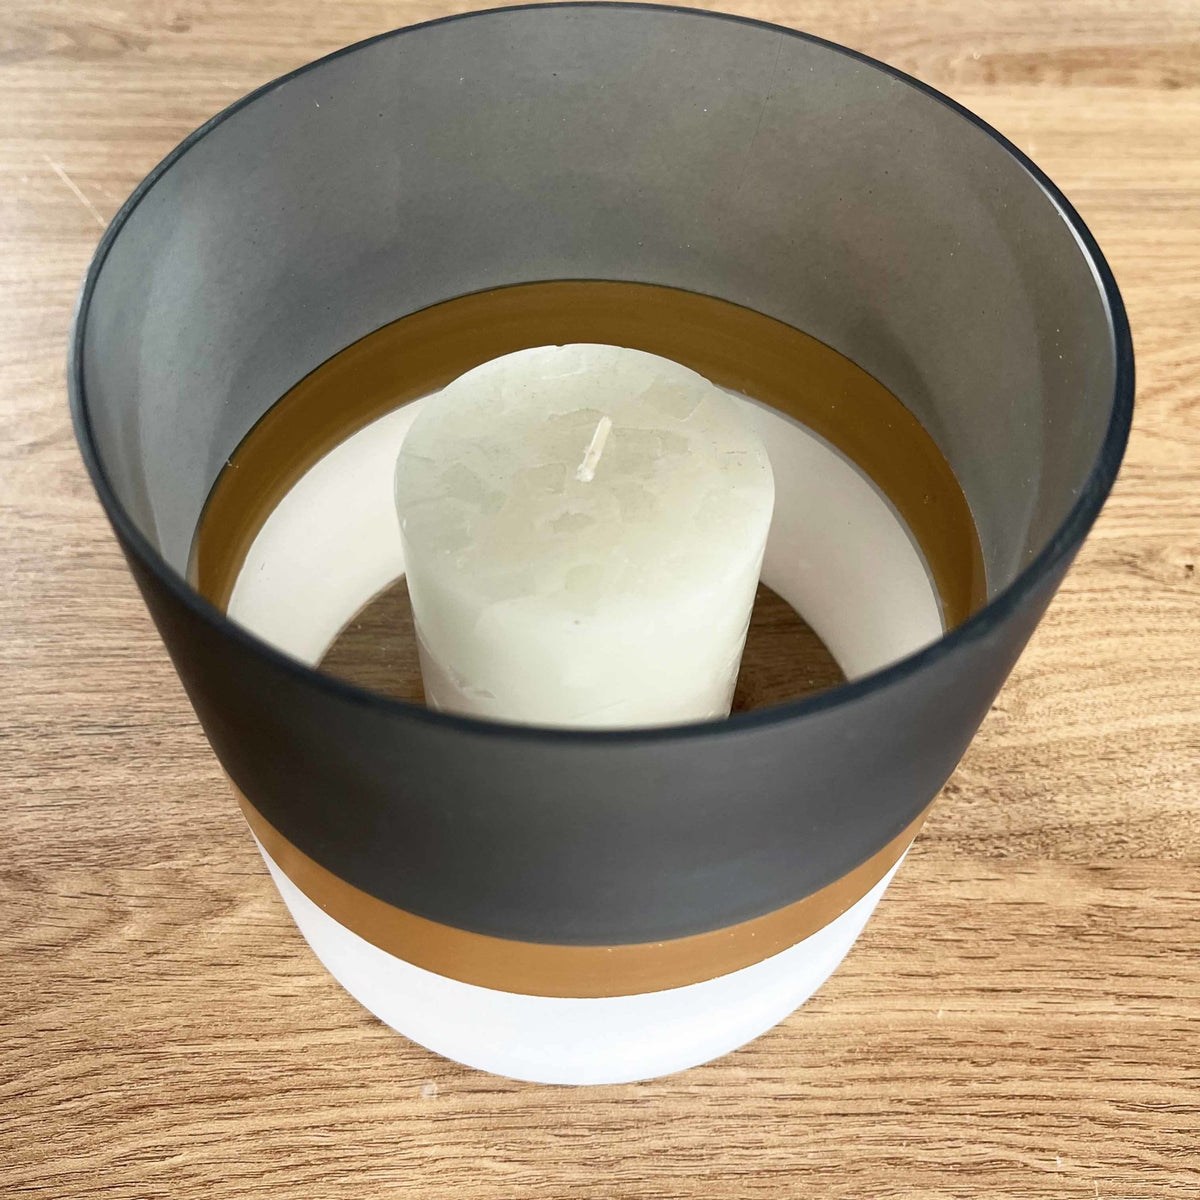 Contra Frosted Glass Votive Candle Holder on wooden table, candle in votive